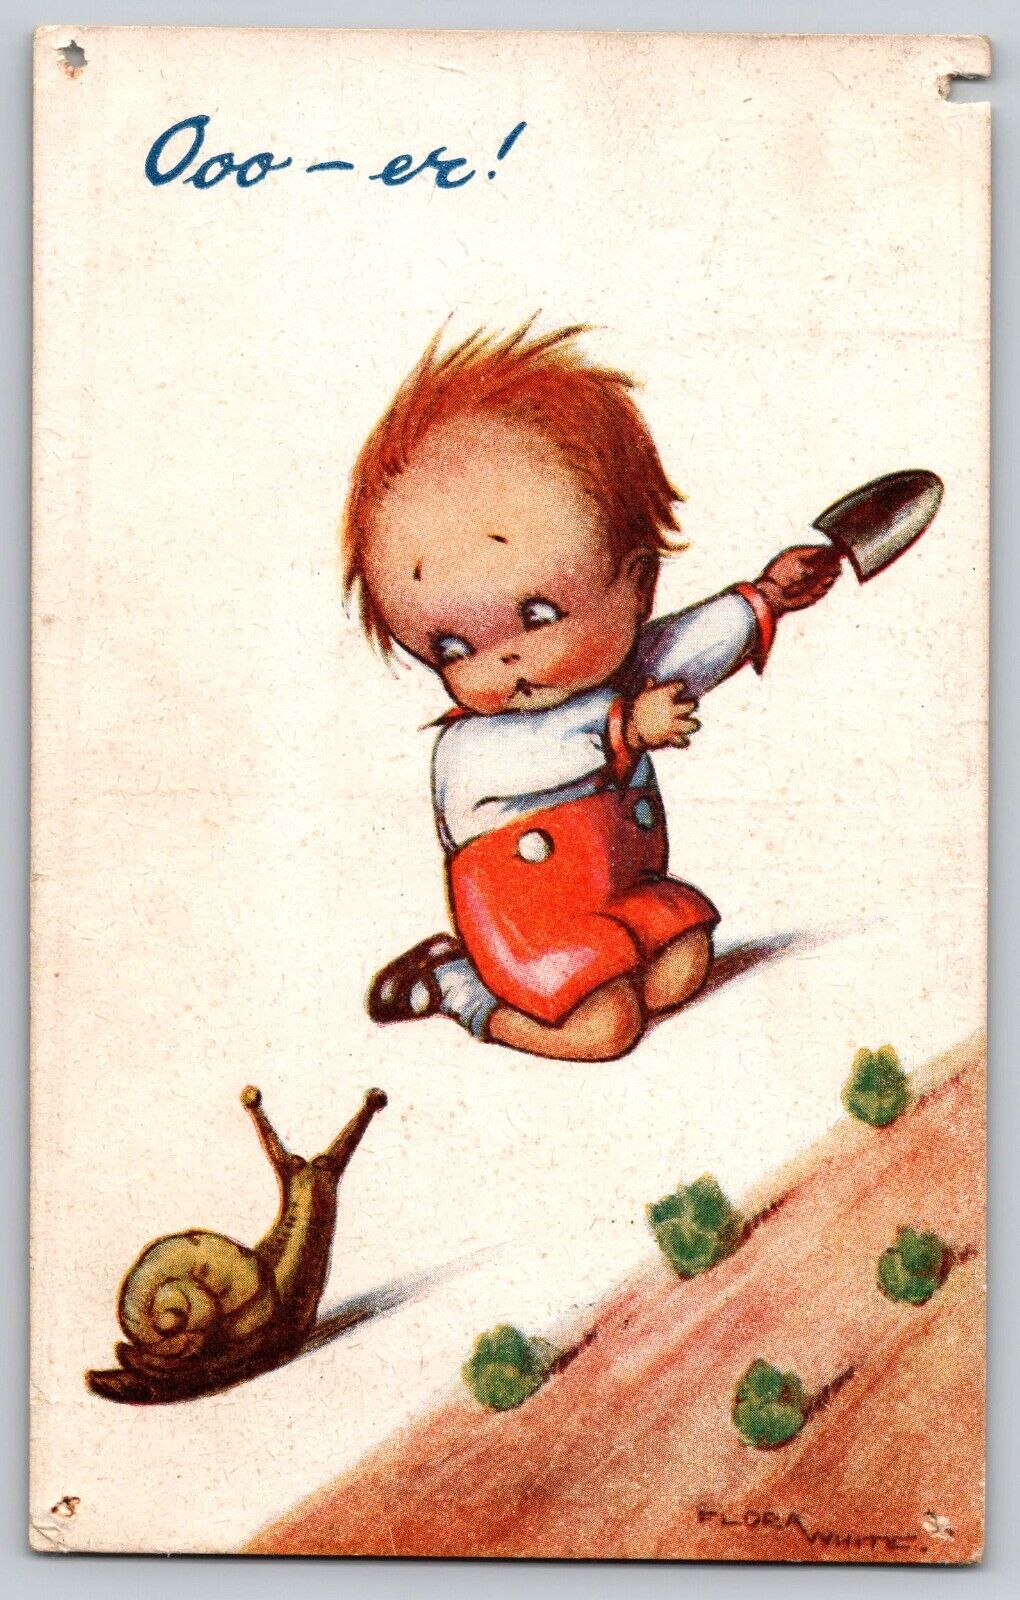 Flora White Artist Signed Vintage Postcard -Child In Garden With Snail-Posted